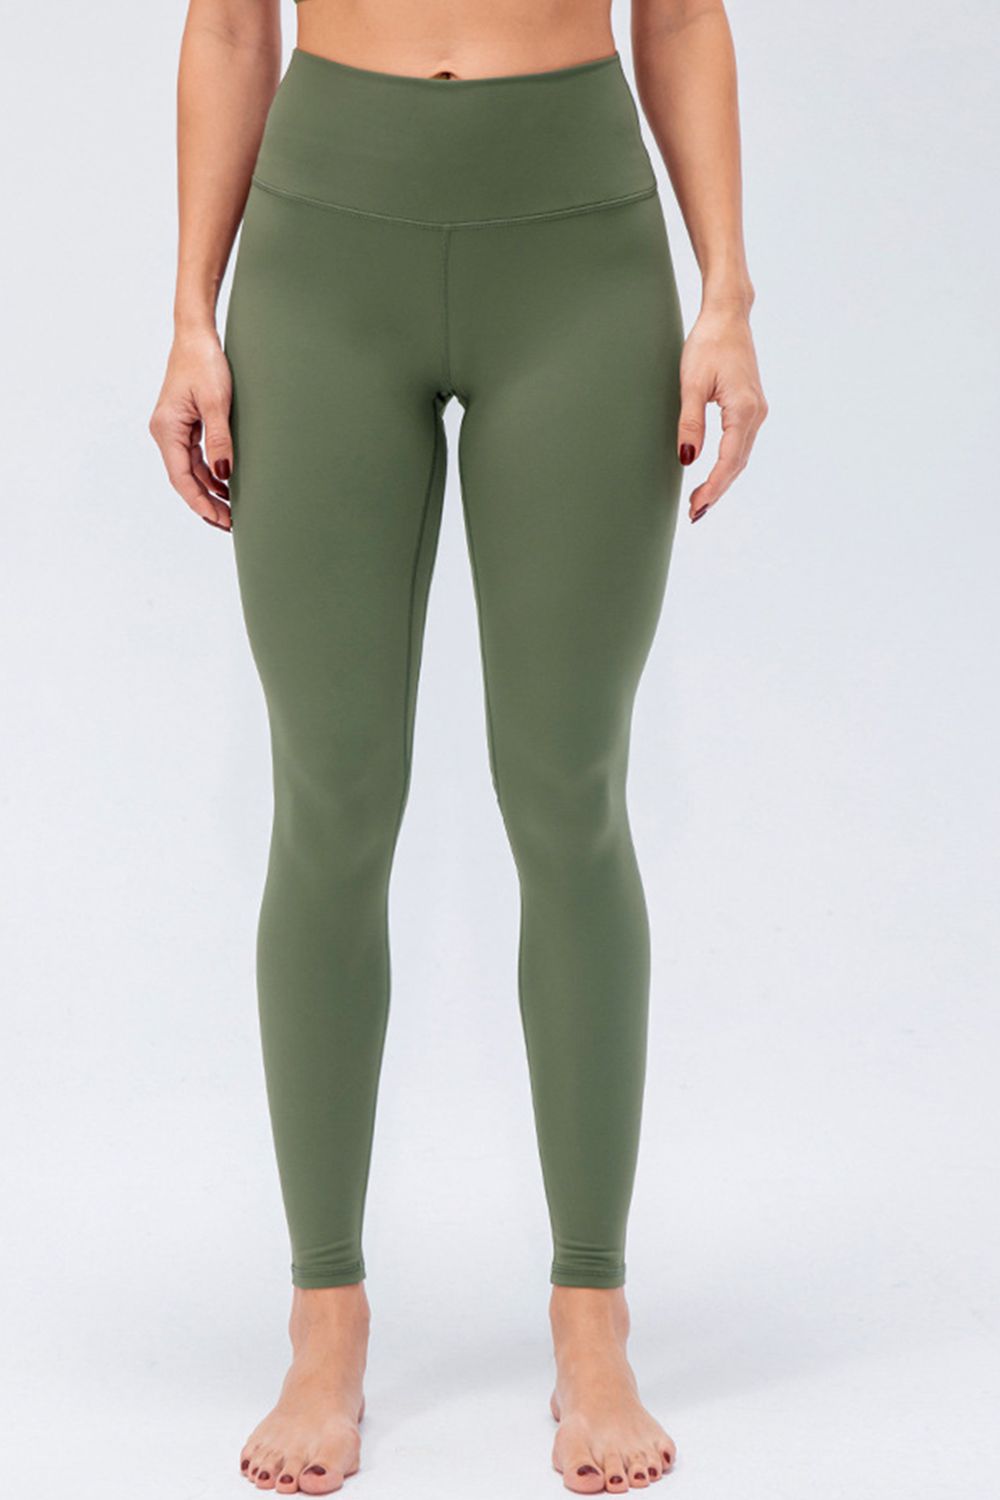 Wide Waistband Slim Fit Active Leggings - Guy Christopher 